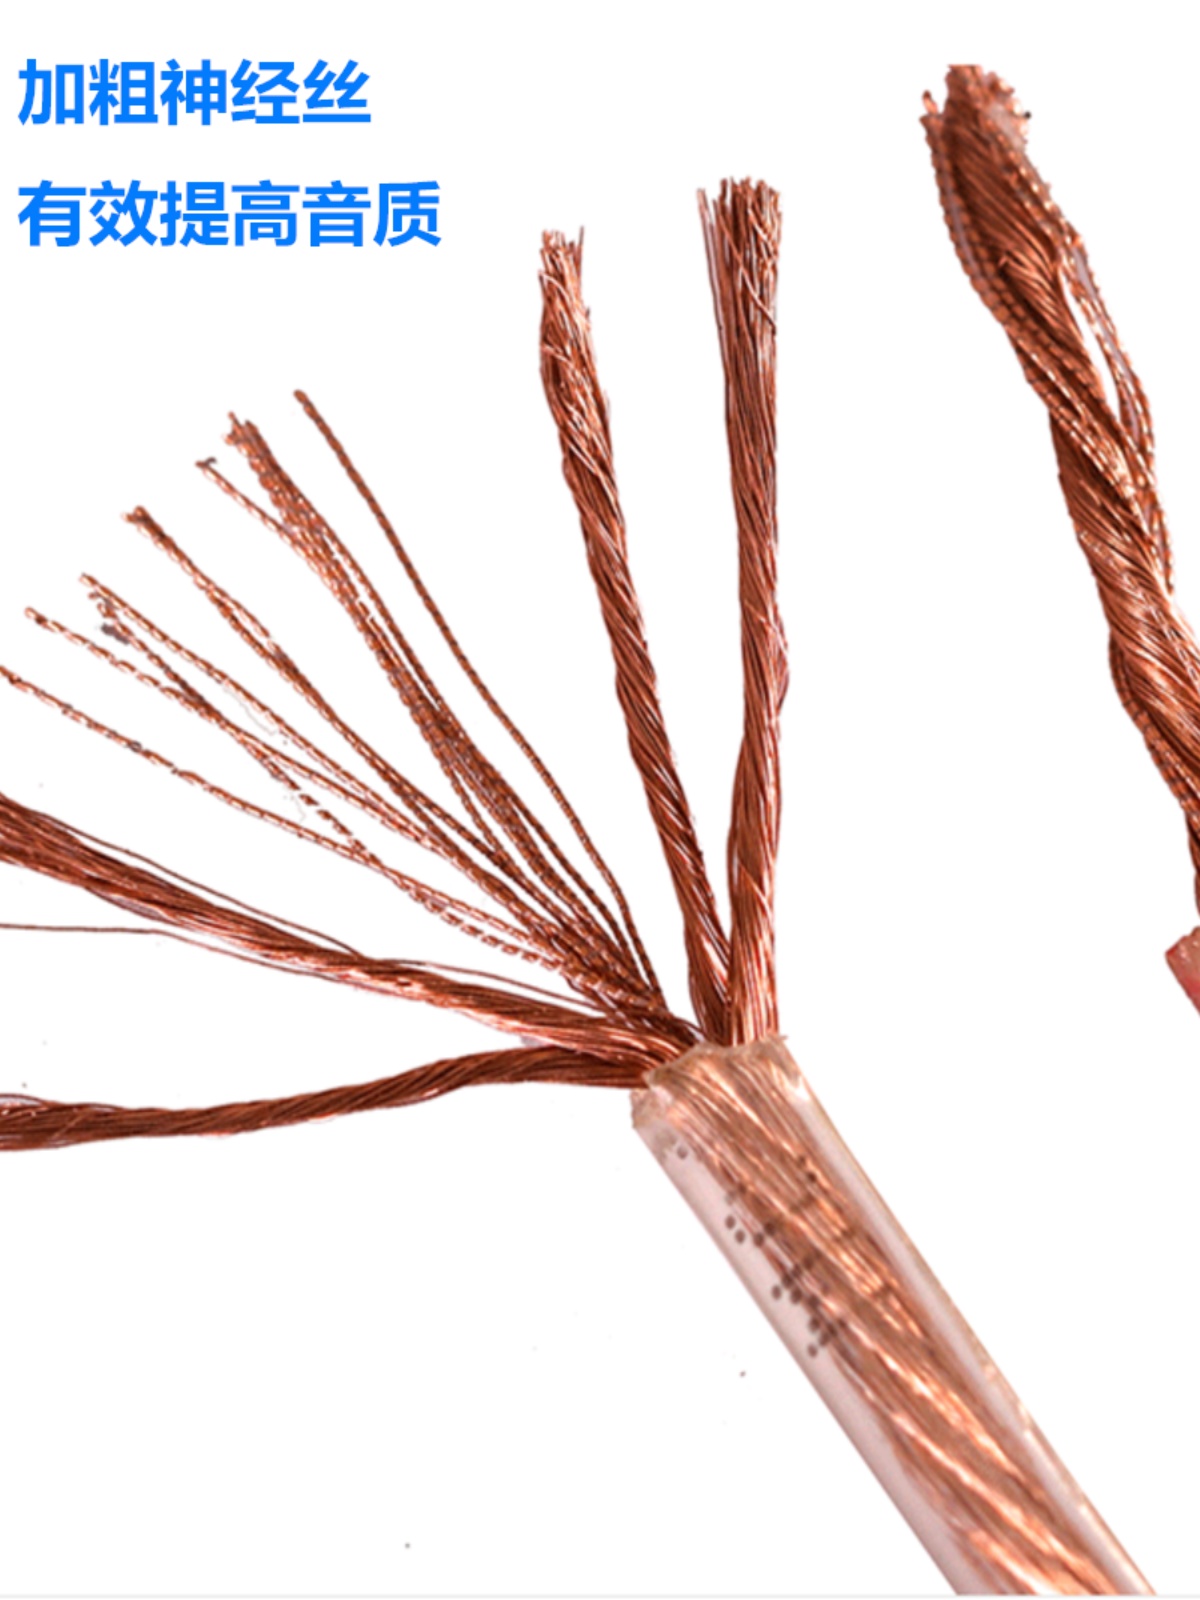 Audio line professional fever oxygen-free copper audio cable connection line universal pure copper speaker line audio line speaker line